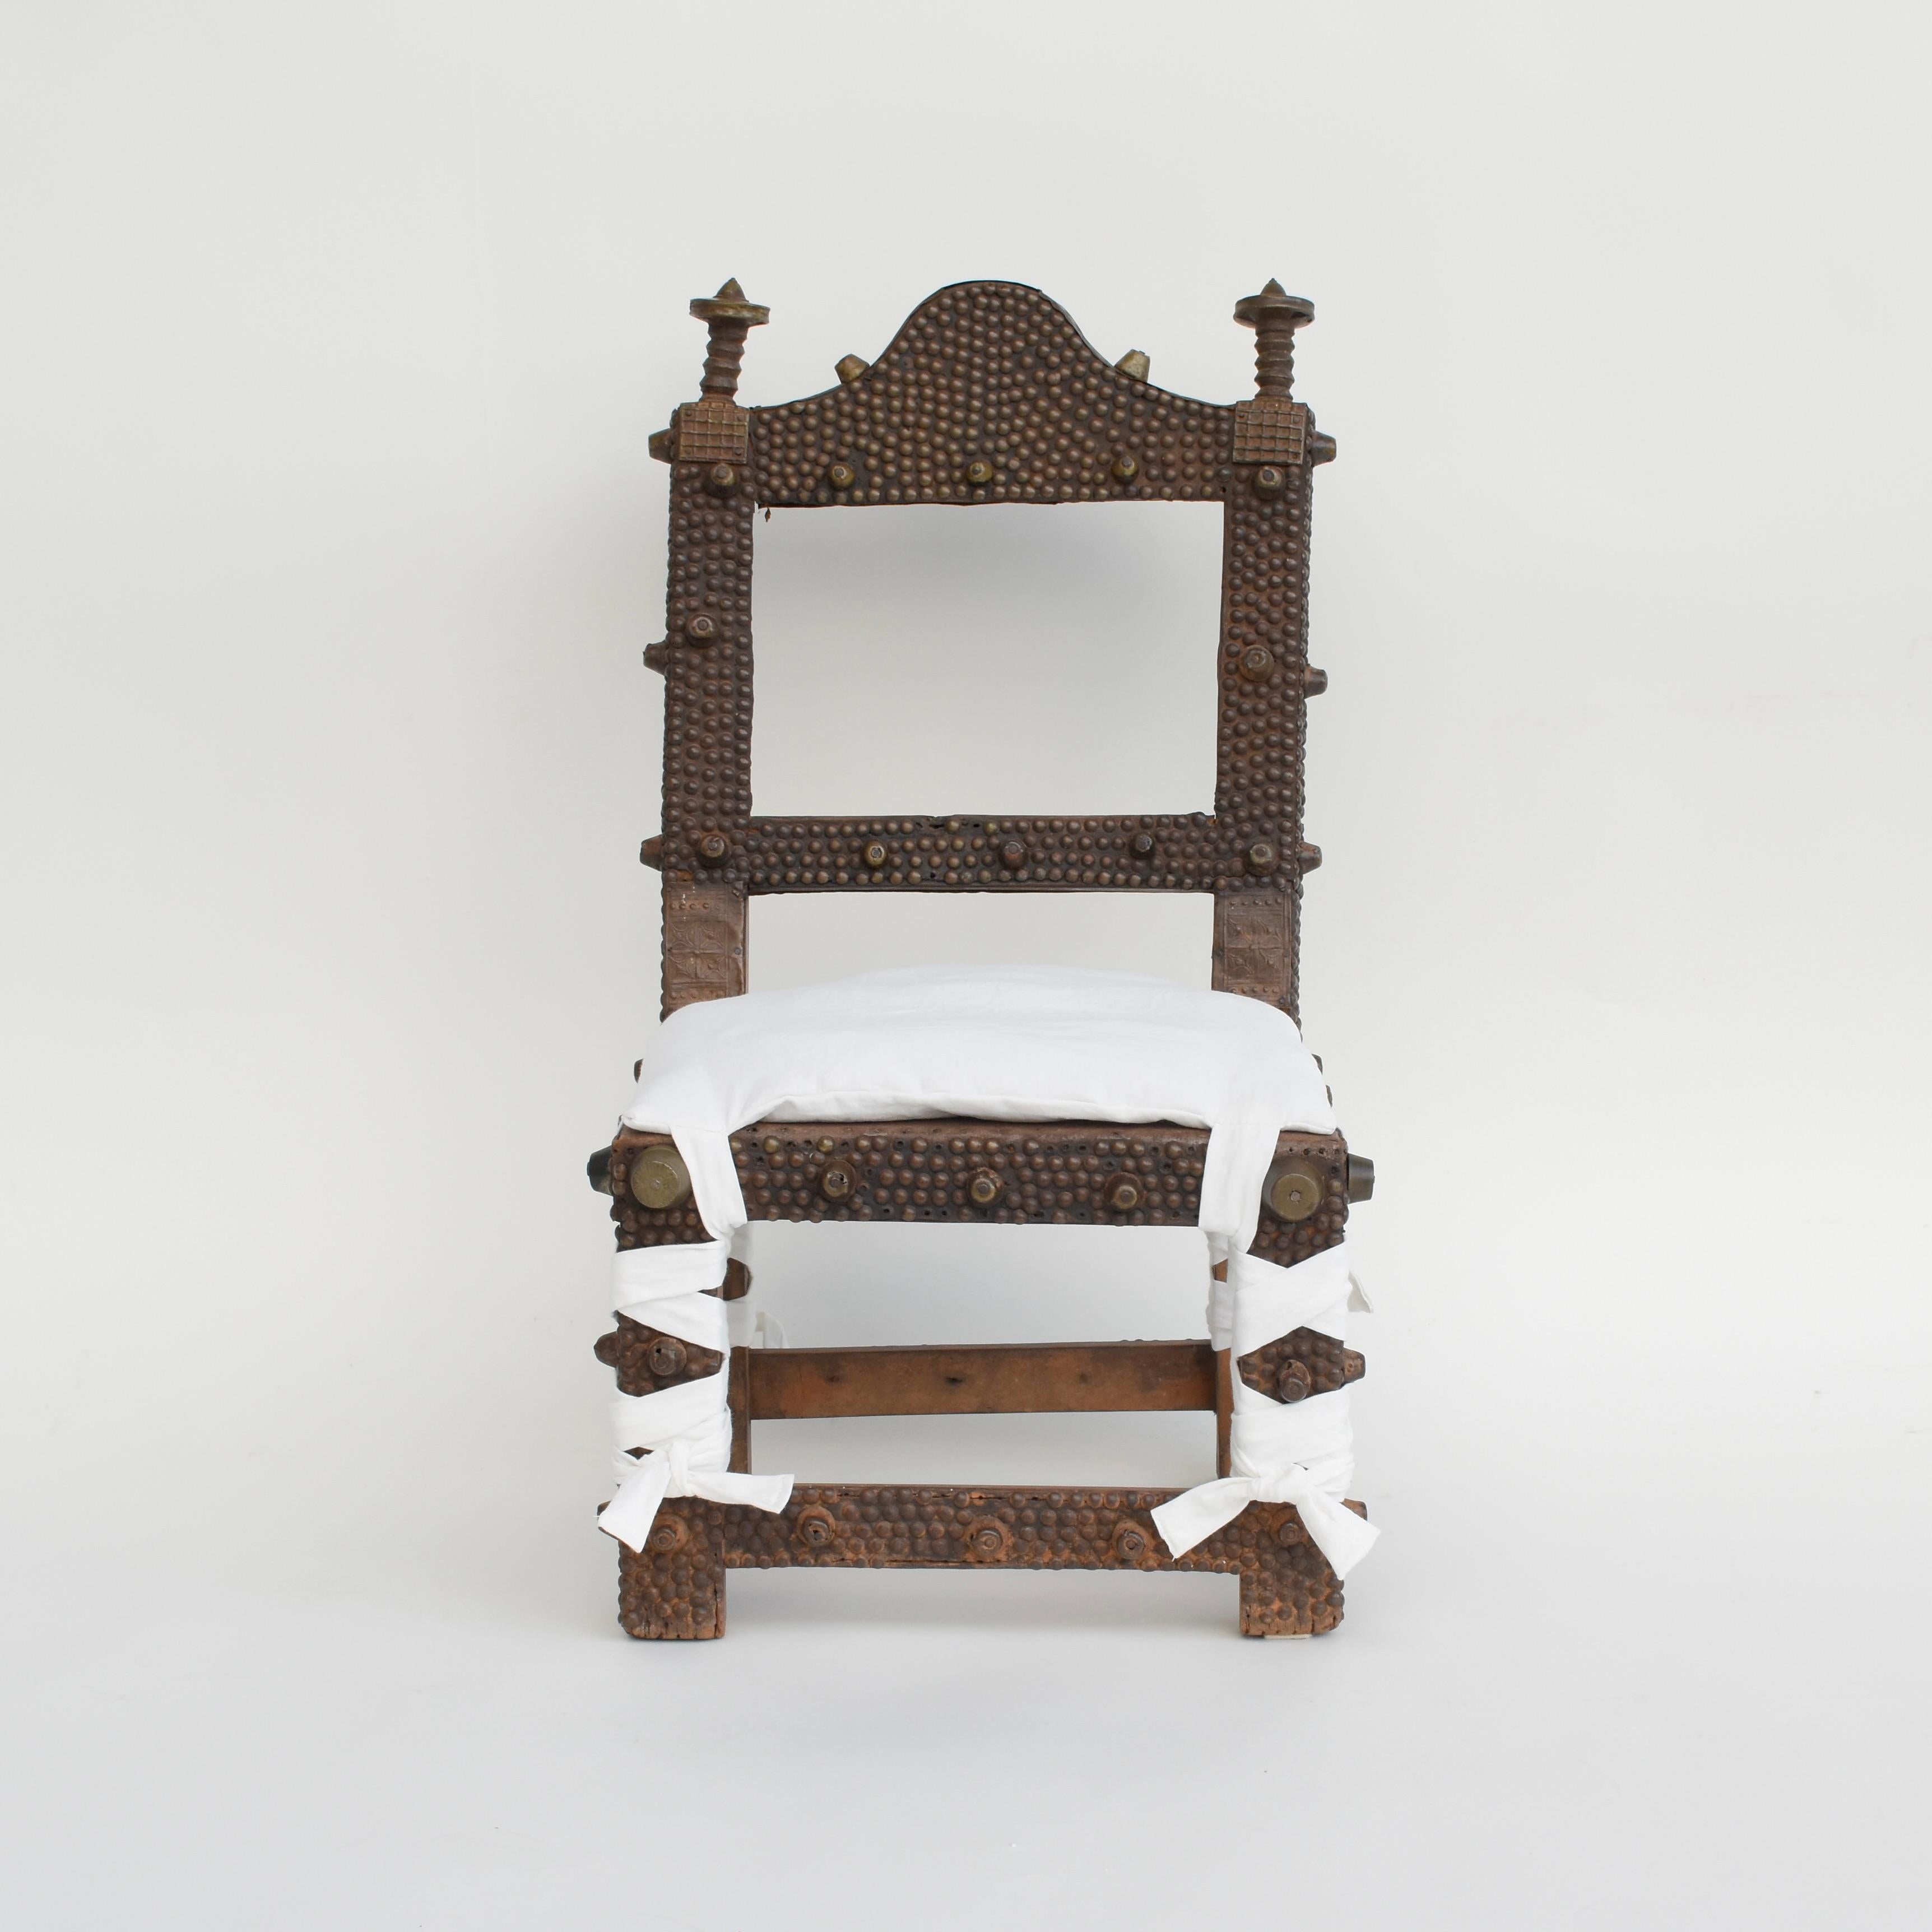 A royal chair in Asante society It is a sign of power and prestige used exclusively by chiefs. The chair is made of a hand carved wood frame covered with hammered brass tacks and studs and leather seat.

The chair looks beautiful as a sculptural